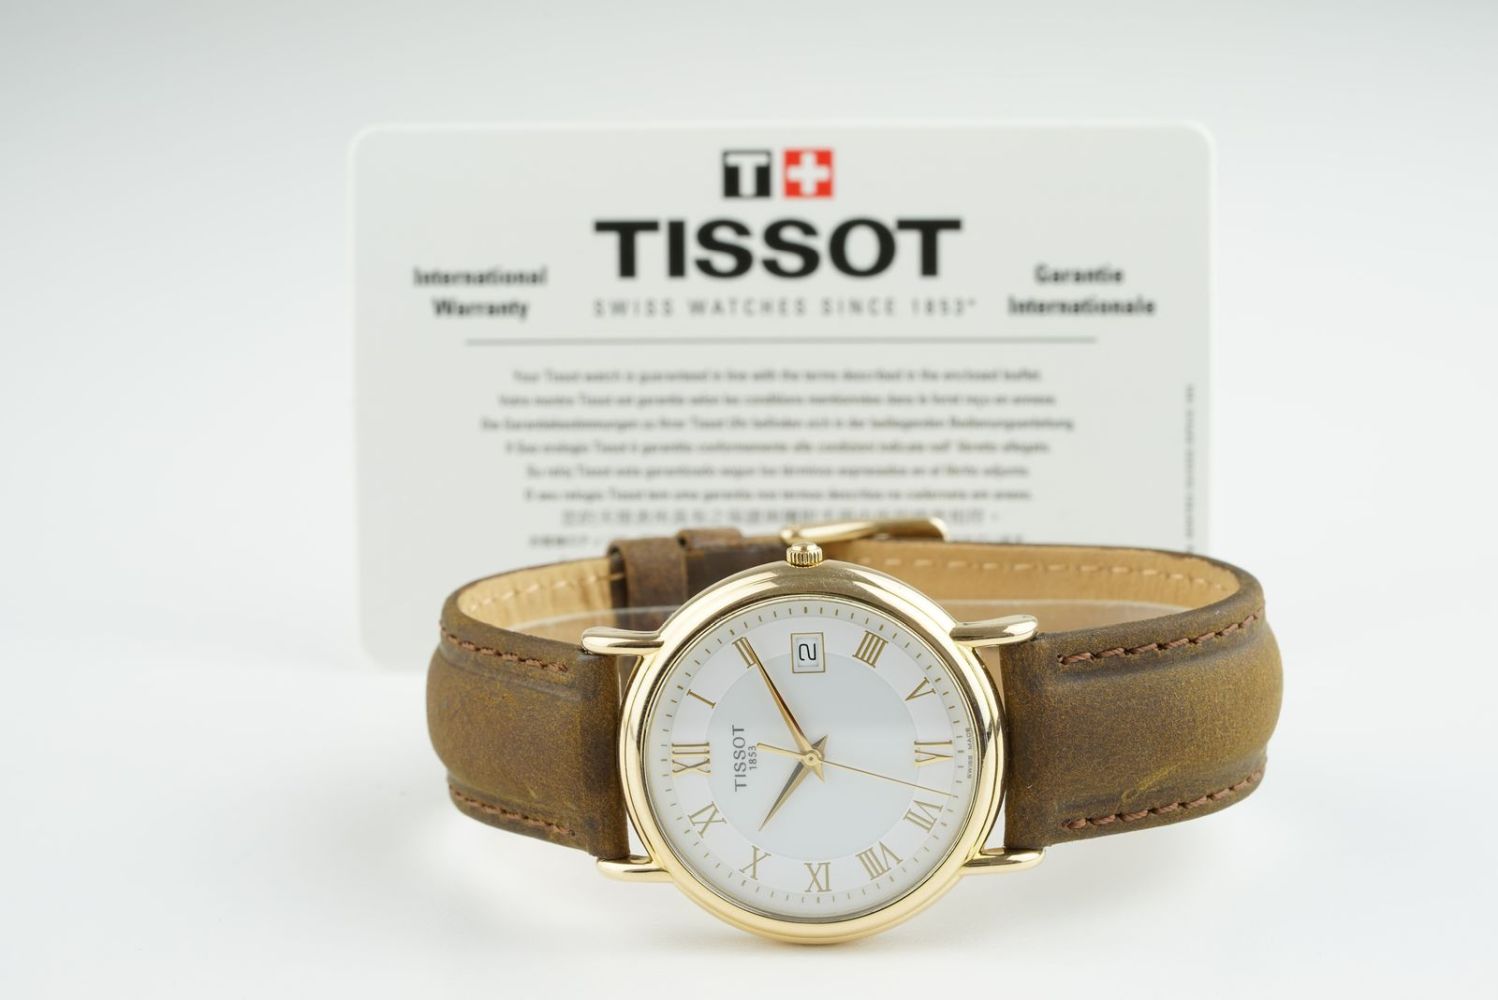 GENTLEMENS TISSOT 18CT GOLD DATE WRISTWATCH W/ WARRANTY CARD, circular white dial with roman numeral